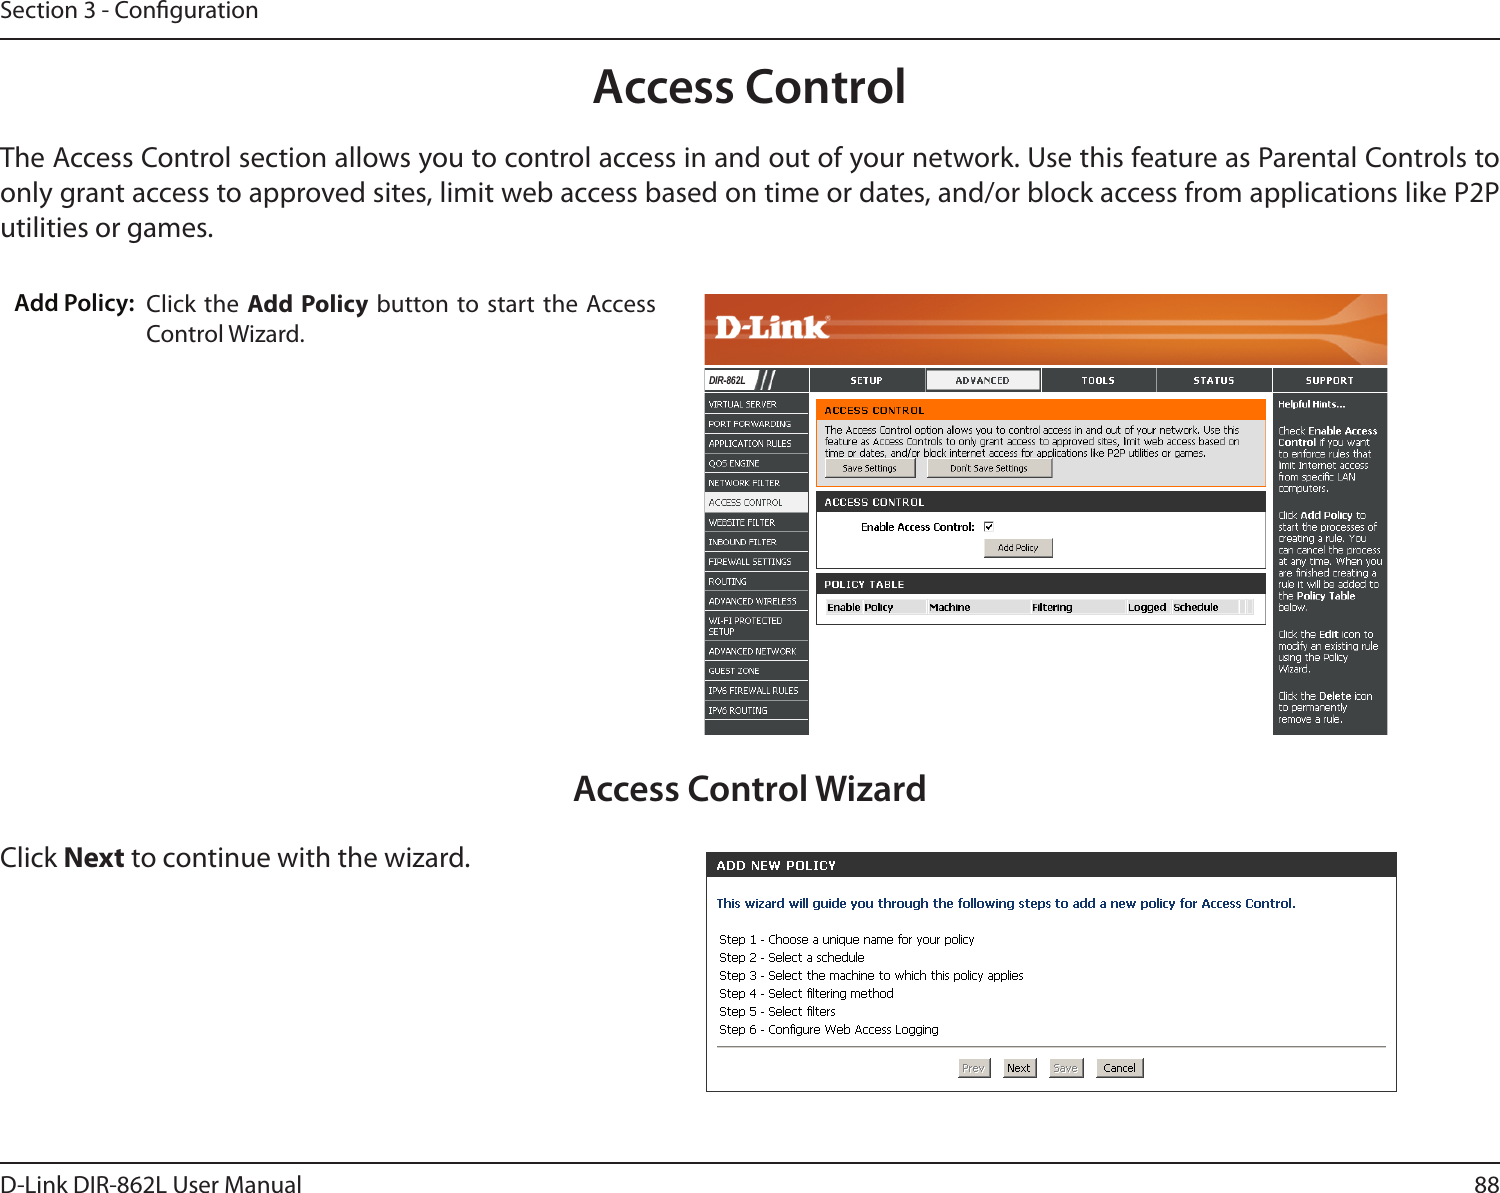 88D-Link DIR-862L User ManualSection 3 - CongurationAccess ControlClick the Add Policy button to start the Access Control Wizard. Add Policy:The Access Control section allows you to control access in and out of your network. Use this feature as Parental Controls to only grant access to approved sites, limit web access based on time or dates, and/or block access from applications like P2P utilities or games.Click Next to continue with the wizard.Access Control WizardDIR-862L